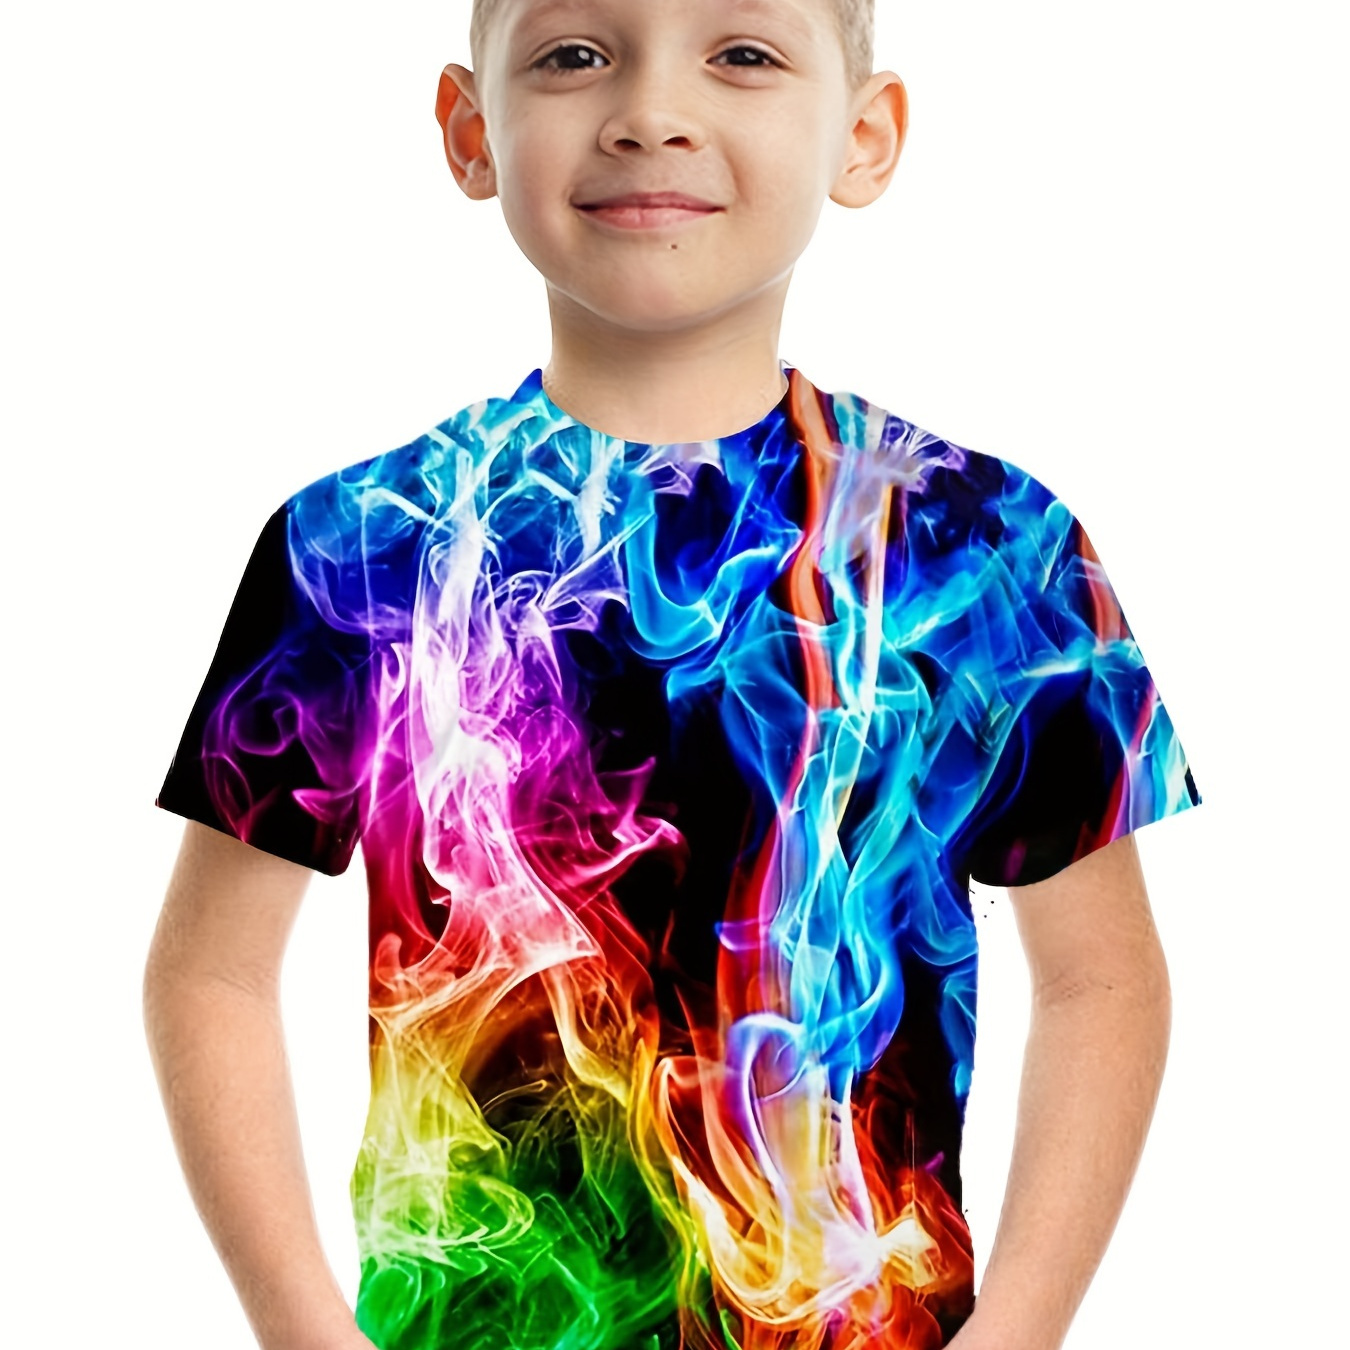 

Fashion Flame 3d Print Boys Creative T-shirt, Casual Lightweight Comfy Short Sleeve Tee Tops, Kids Clothings For Summer